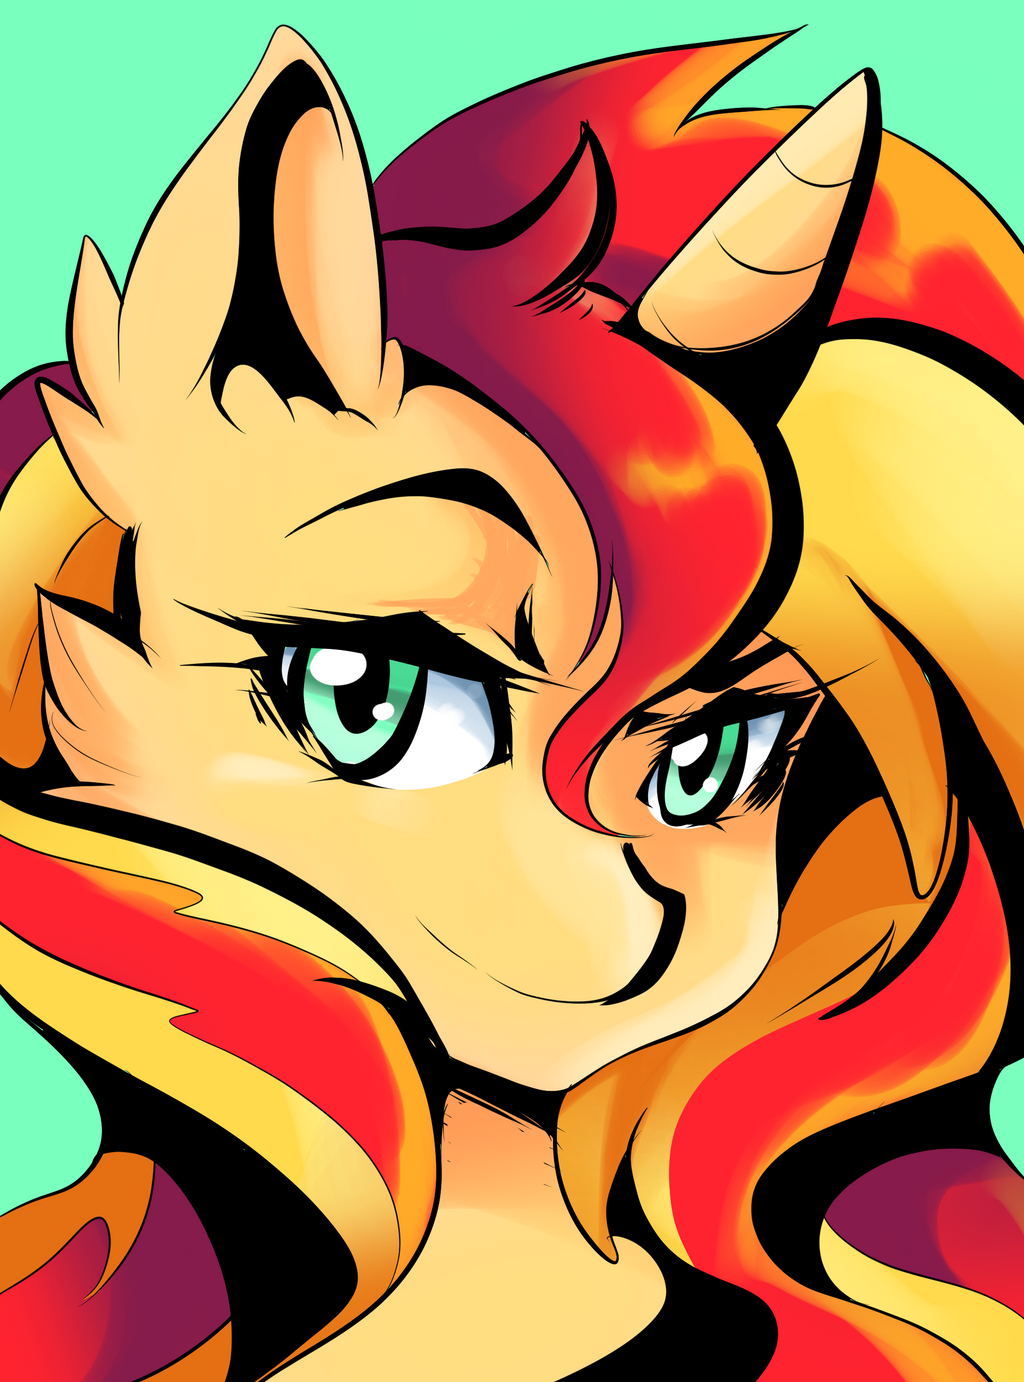 http://img14.deviantart.net/22f5/i/2016/046/8/e/sunset_shimmer__close_up__by_twintailwind-d9rxhl1.png